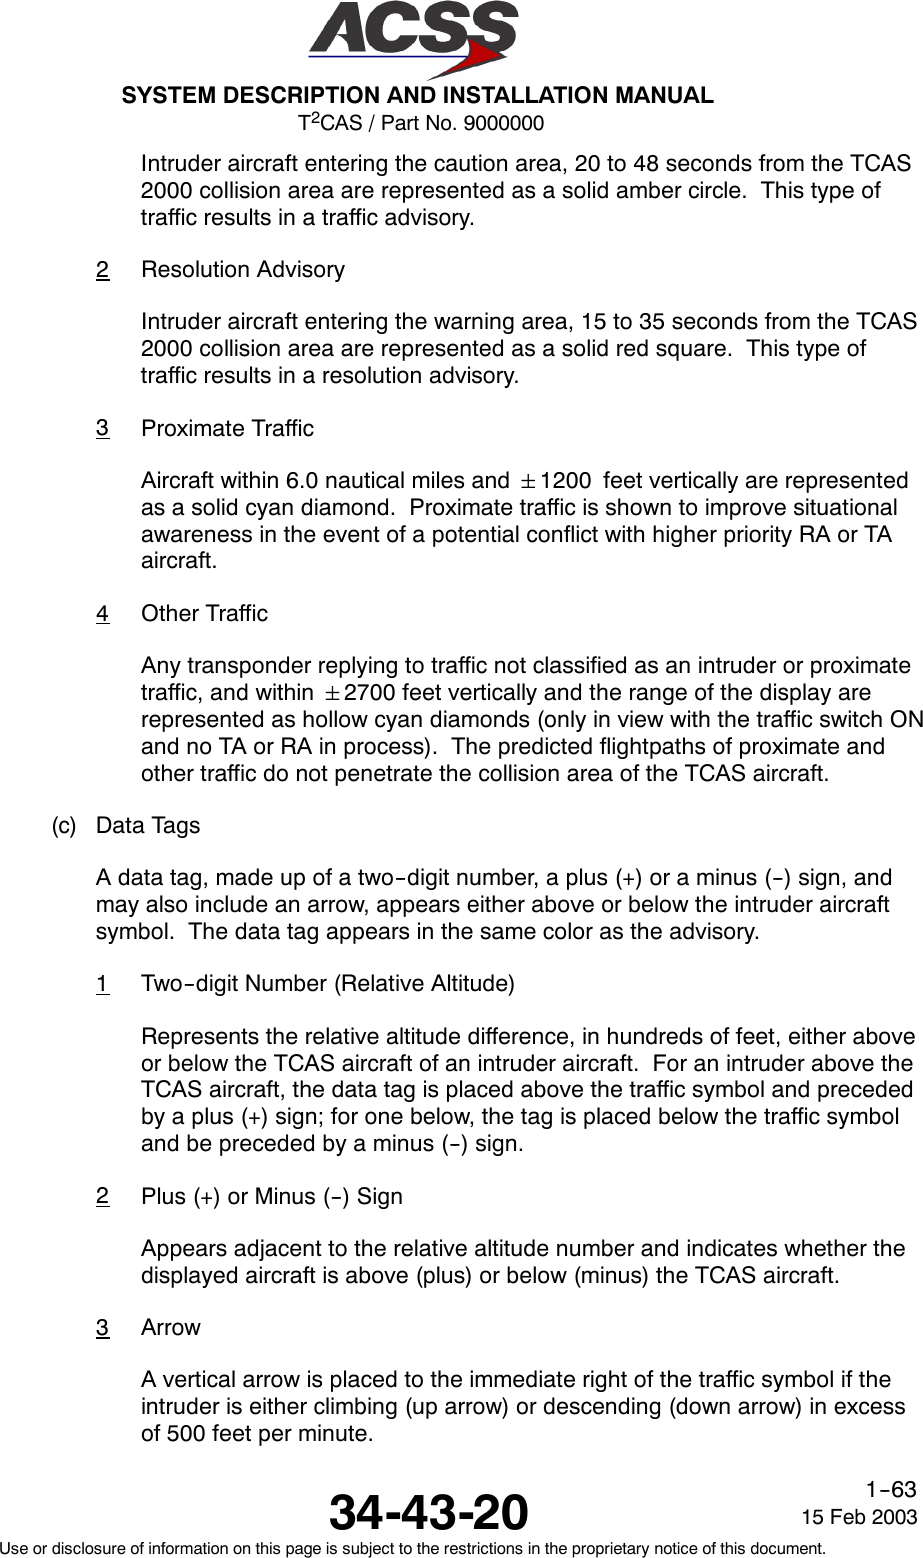 T2CAS / Part No. 9000000SYSTEM DESCRIPTION AND INSTALLATION MANUAL34-43-20 15 Feb 2003Use or disclosure of information on this page is subject to the restrictions in the proprietary notice of this document.1--63Intruder aircraft entering the caution area, 20 to 48 seconds from the TCAS2000 collision area are represented as a solid amber circle. This type oftraffic results in a traffic advisory.2Resolution AdvisoryIntruder aircraft entering the warning area, 15 to 35 seconds from the TCAS2000 collision area are represented as a solid red square. This type oftraffic results in a resolution advisory.3Proximate TrafficAircraft within 6.0 nautical miles and 1200 feet vertically are representedas a solid cyan diamond. Proximate traffic is shown to improve situationalawareness in the event of a potential conflict with higher priority RA or TAaircraft.4Other TrafficAny transponder replying to traffic not classified as an intruder or proximatetraffic, and within 2700 feet vertically and the range of the display arerepresented as hollow cyan diamonds (only in view with the traffic switch ONand no TA or RA in process). The predicted flightpaths of proximate andother traffic do not penetrate the collision area of the TCAS aircraft.(c) Data TagsA data tag, made up of a two--digit number, a plus (+) or a minus (--) sign, andmay also include an arrow, appears either above or below the intruder aircraftsymbol. The data tag appears in the same color as the advisory.1Two--digit Number (Relative Altitude)Represents the relative altitude difference, in hundreds of feet, either aboveor below the TCAS aircraft of an intruder aircraft. For an intruder above theTCAS aircraft, the data tag is placed above the traffic symbol and precededby a plus (+) sign; for one below, the tag is placed below the traffic symboland be preceded by a minus (--) sign.2Plus (+) or Minus (--) SignAppears adjacent to the relative altitude number and indicates whether thedisplayed aircraft is above (plus) or below (minus) the TCAS aircraft.3ArrowA vertical arrow is placed to the immediate right of the traffic symbol if theintruder is either climbing (up arrow) or descending (down arrow) in excessof 500 feet per minute.